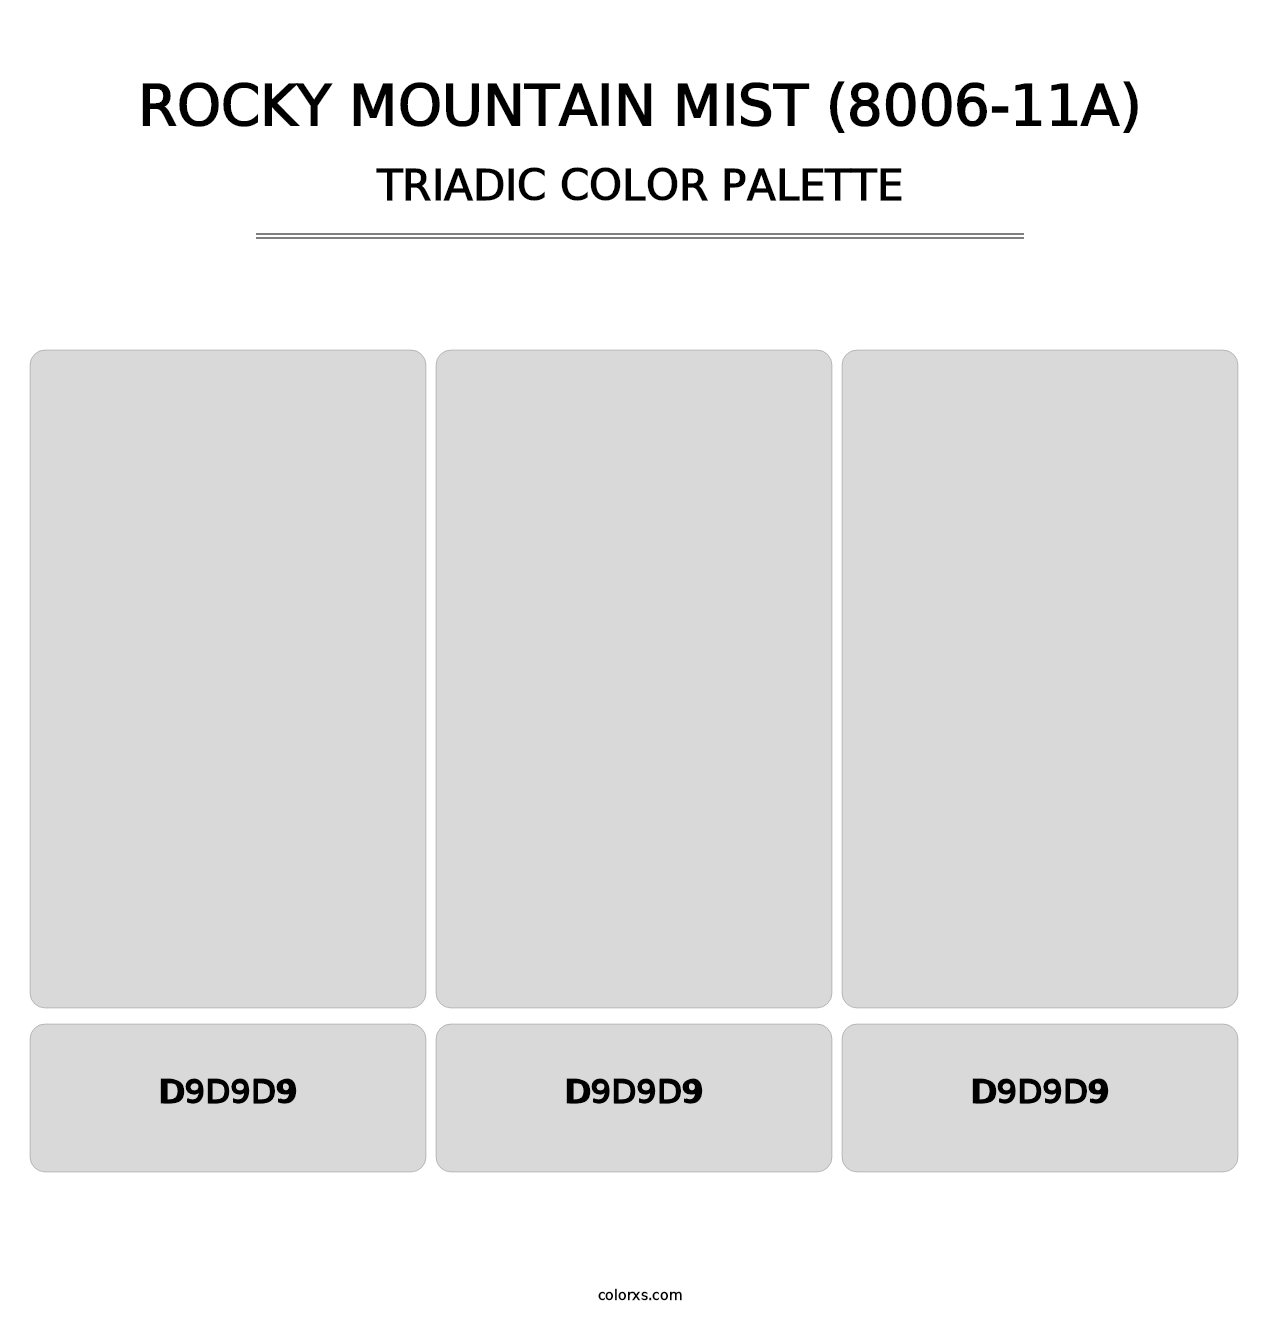 Rocky Mountain Mist (8006-11A) - Triadic Color Palette